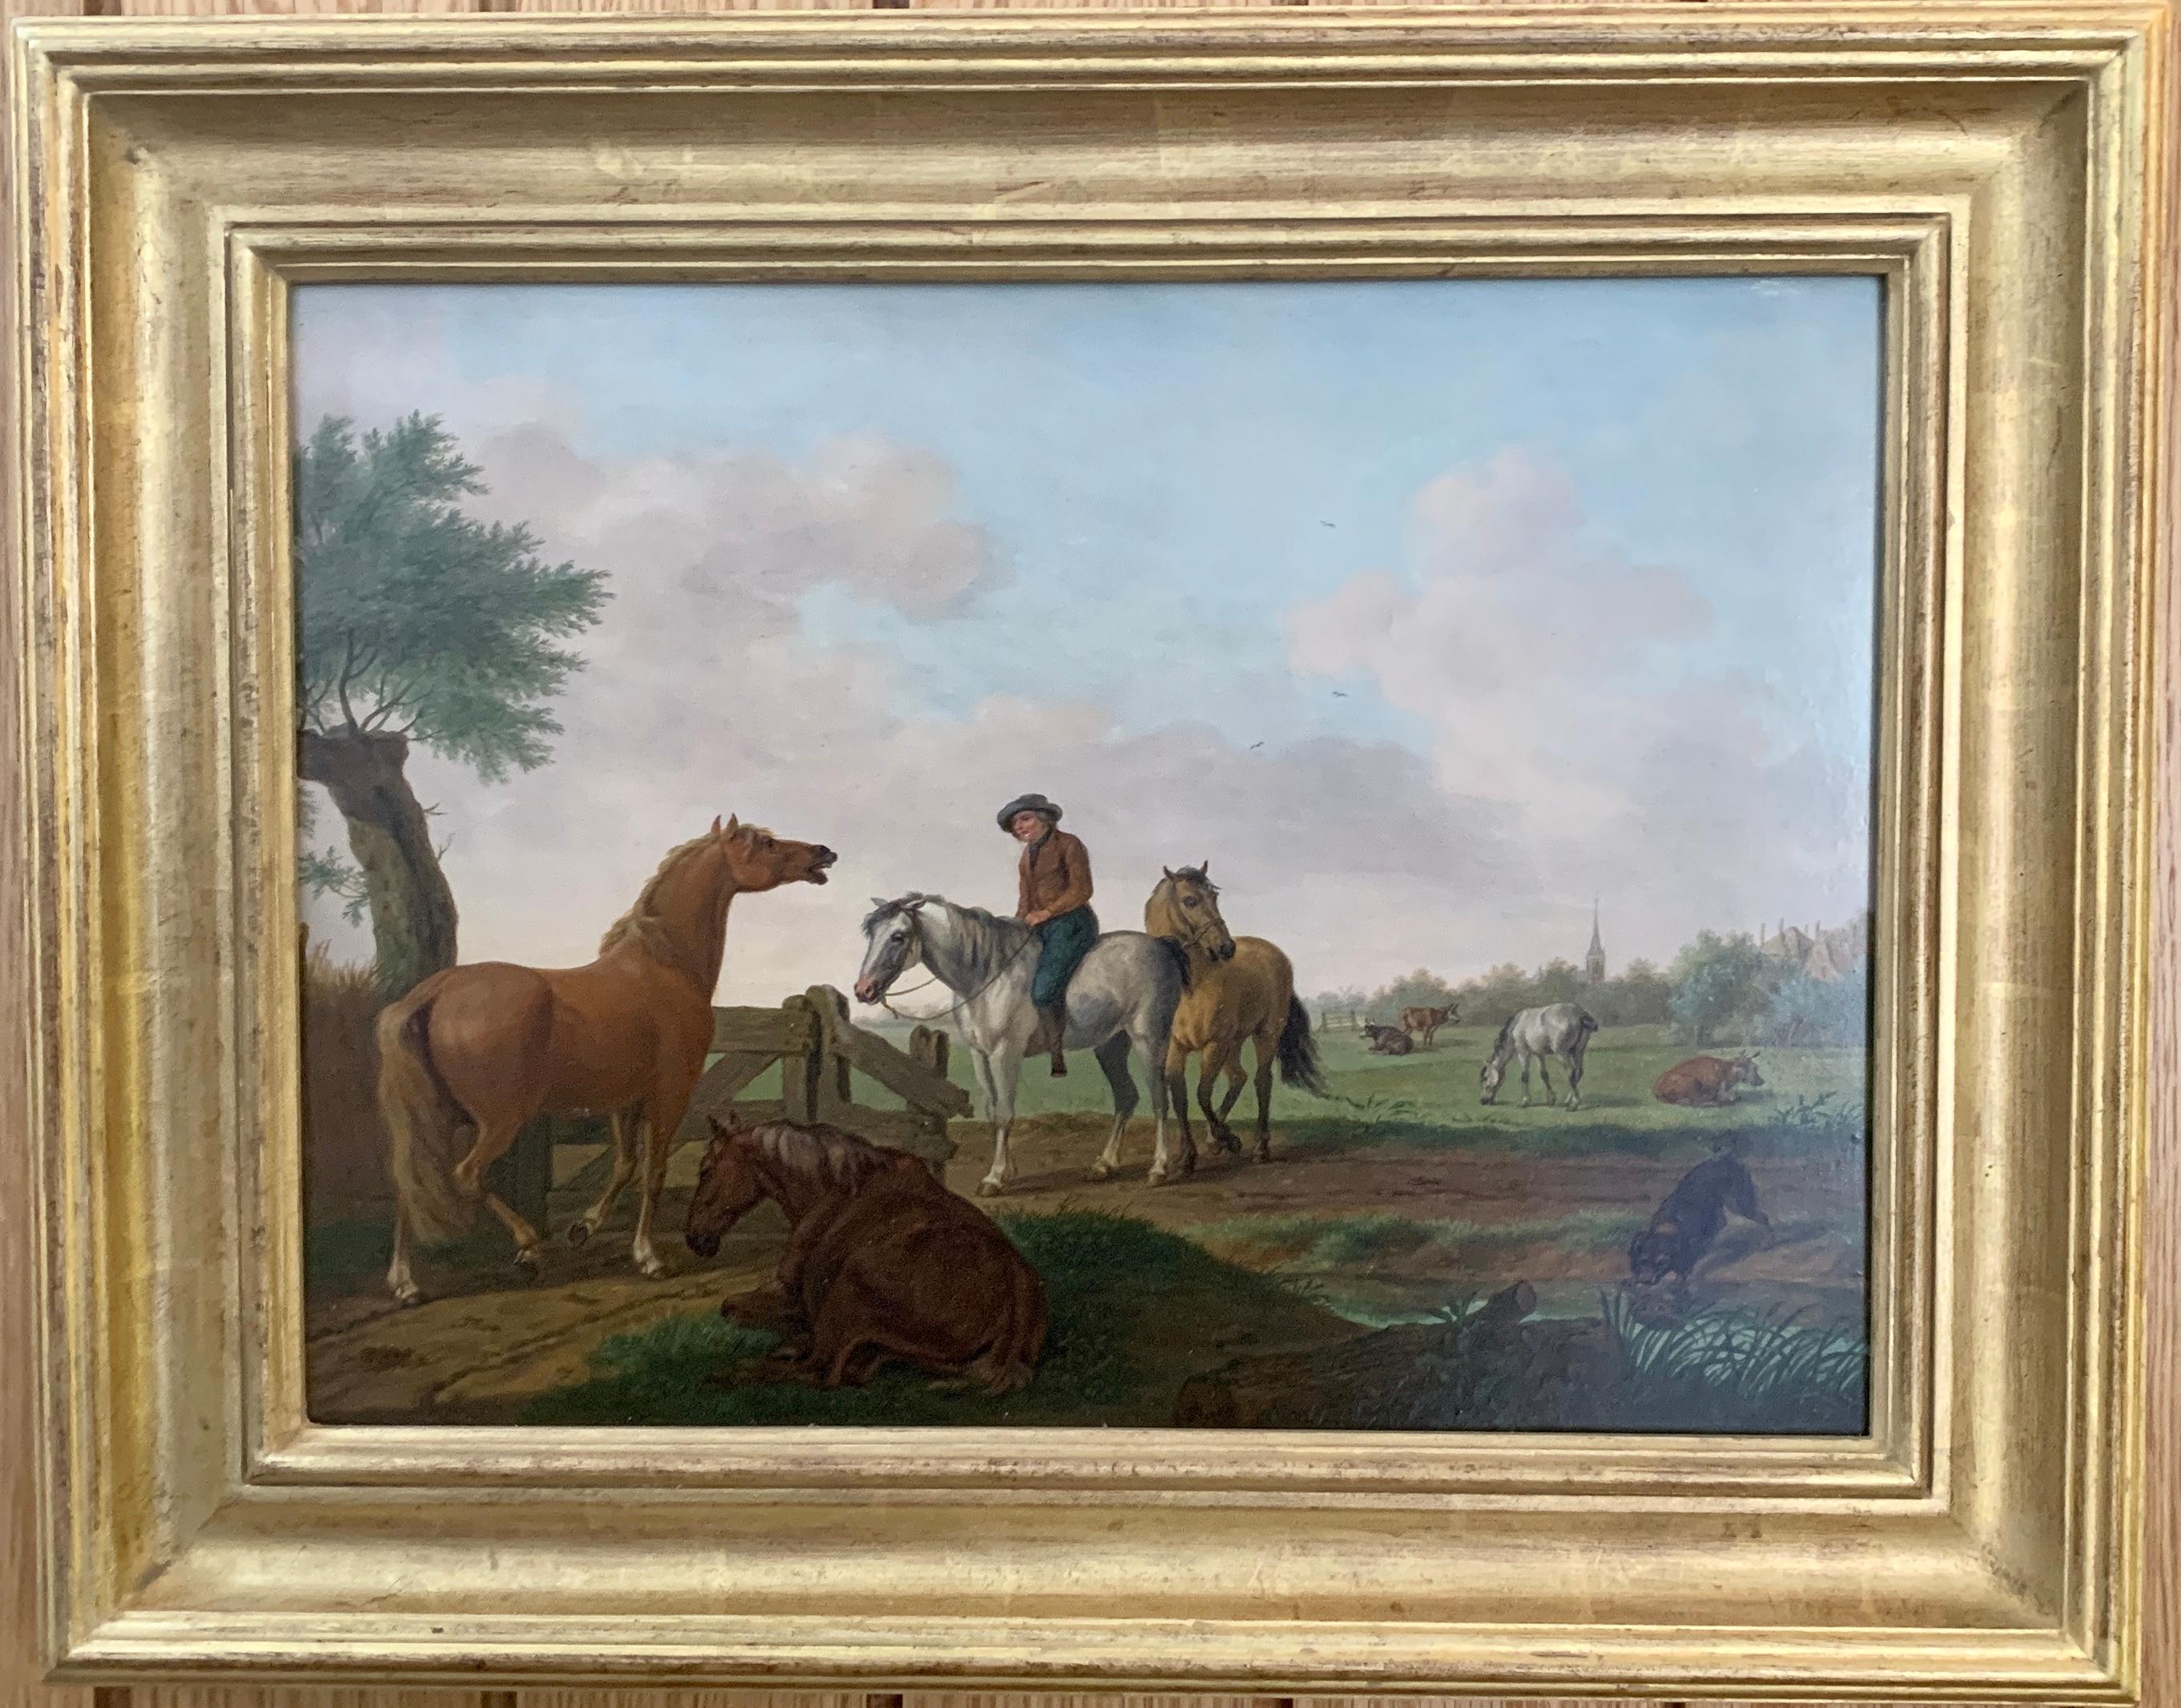 Tethart Philip Christiaan Haag Landscape Painting - 18th century Dutch oil of men on horses with landscape, and dog by a pond